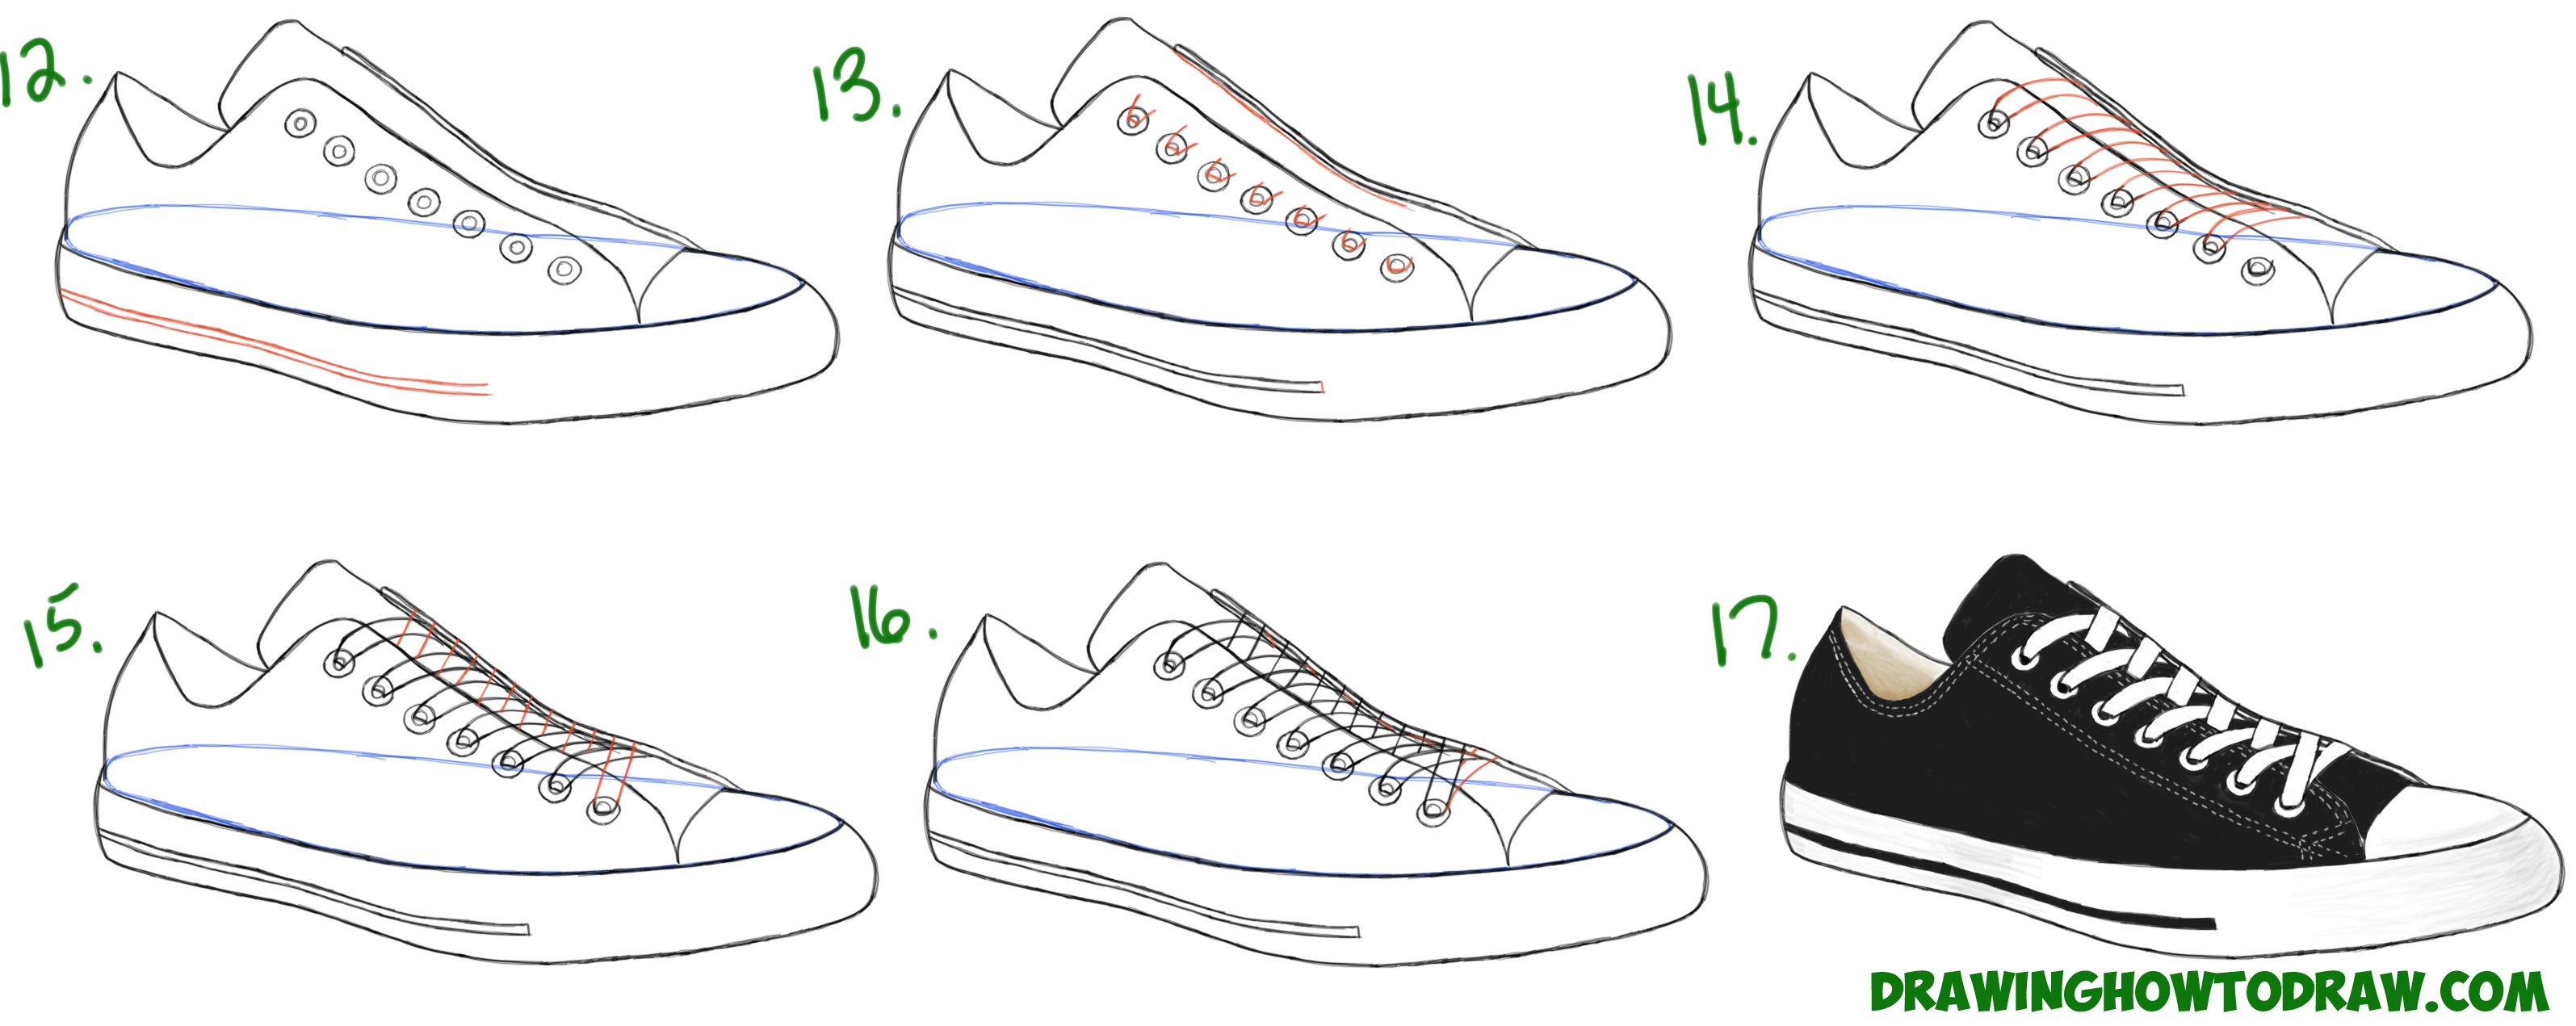 how to draw converse shoes